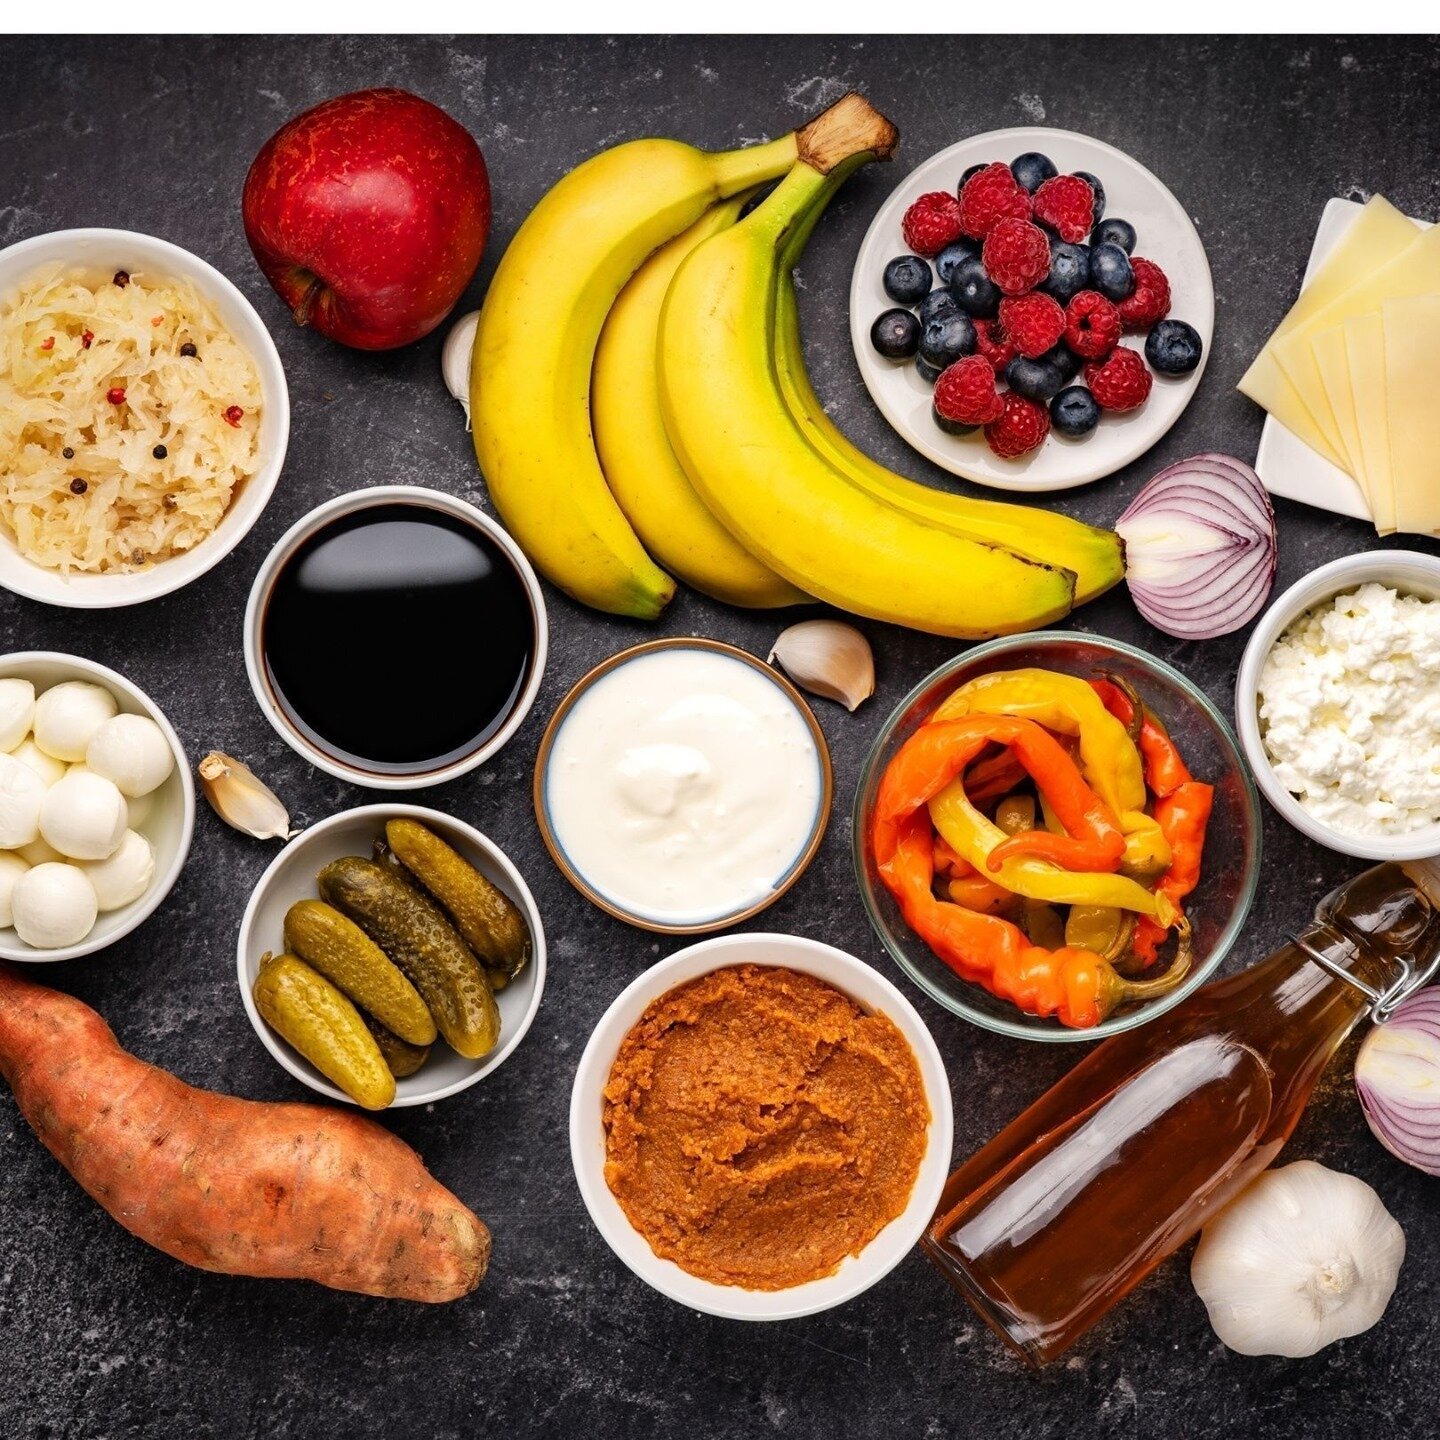 &ldquo;Good&rdquo; bacteria promote an increase in bone formation and a decrease in bone resorption. A food plan high in probiotics and/or added probiotics help to maintain bone health. People who suffer from gastrointestinal problems have a much gre